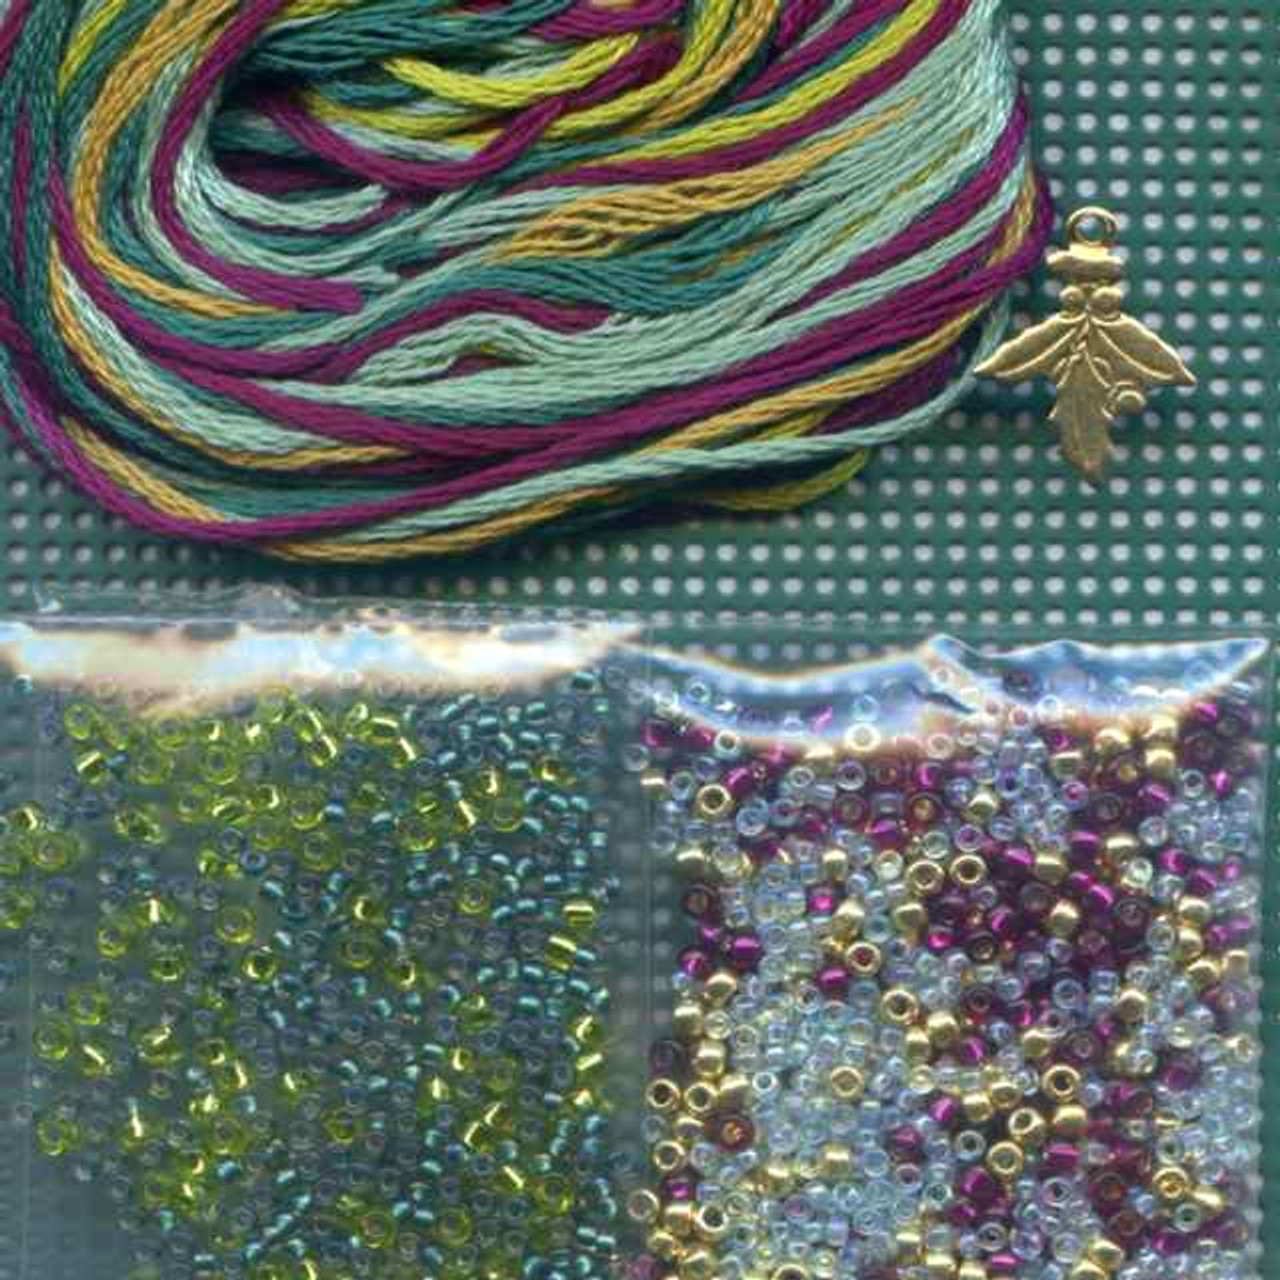 Materials included in Berry Beaded Cross Stitch Kit Mill Hill 2014 Christmas Jewels